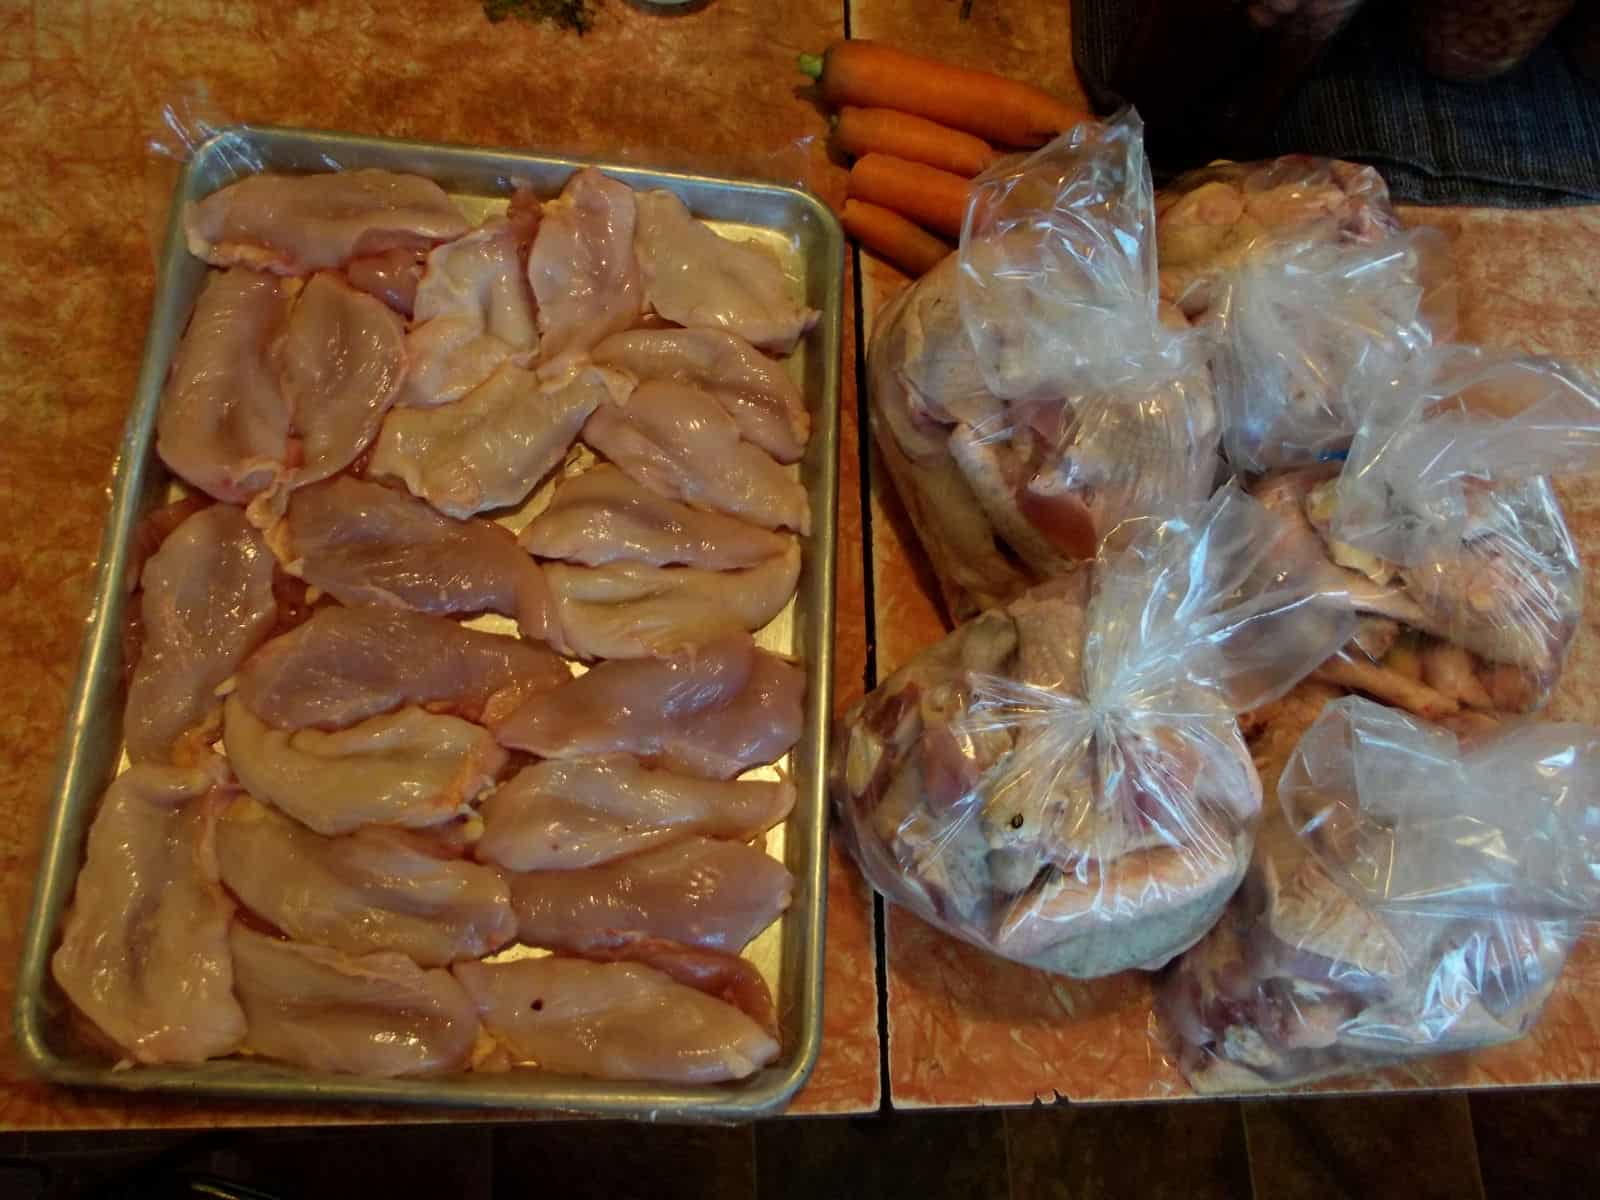 After packaging: A tray of breast meat to freeze individually, then bag, and five meal's worth of pieces. After I laid out the breast pieces, I remember that they need to be aged, so I put them in a bag and will lay them out again in three days. We always keep our chicken in the fridge for three days before freezing, so it is more tender.